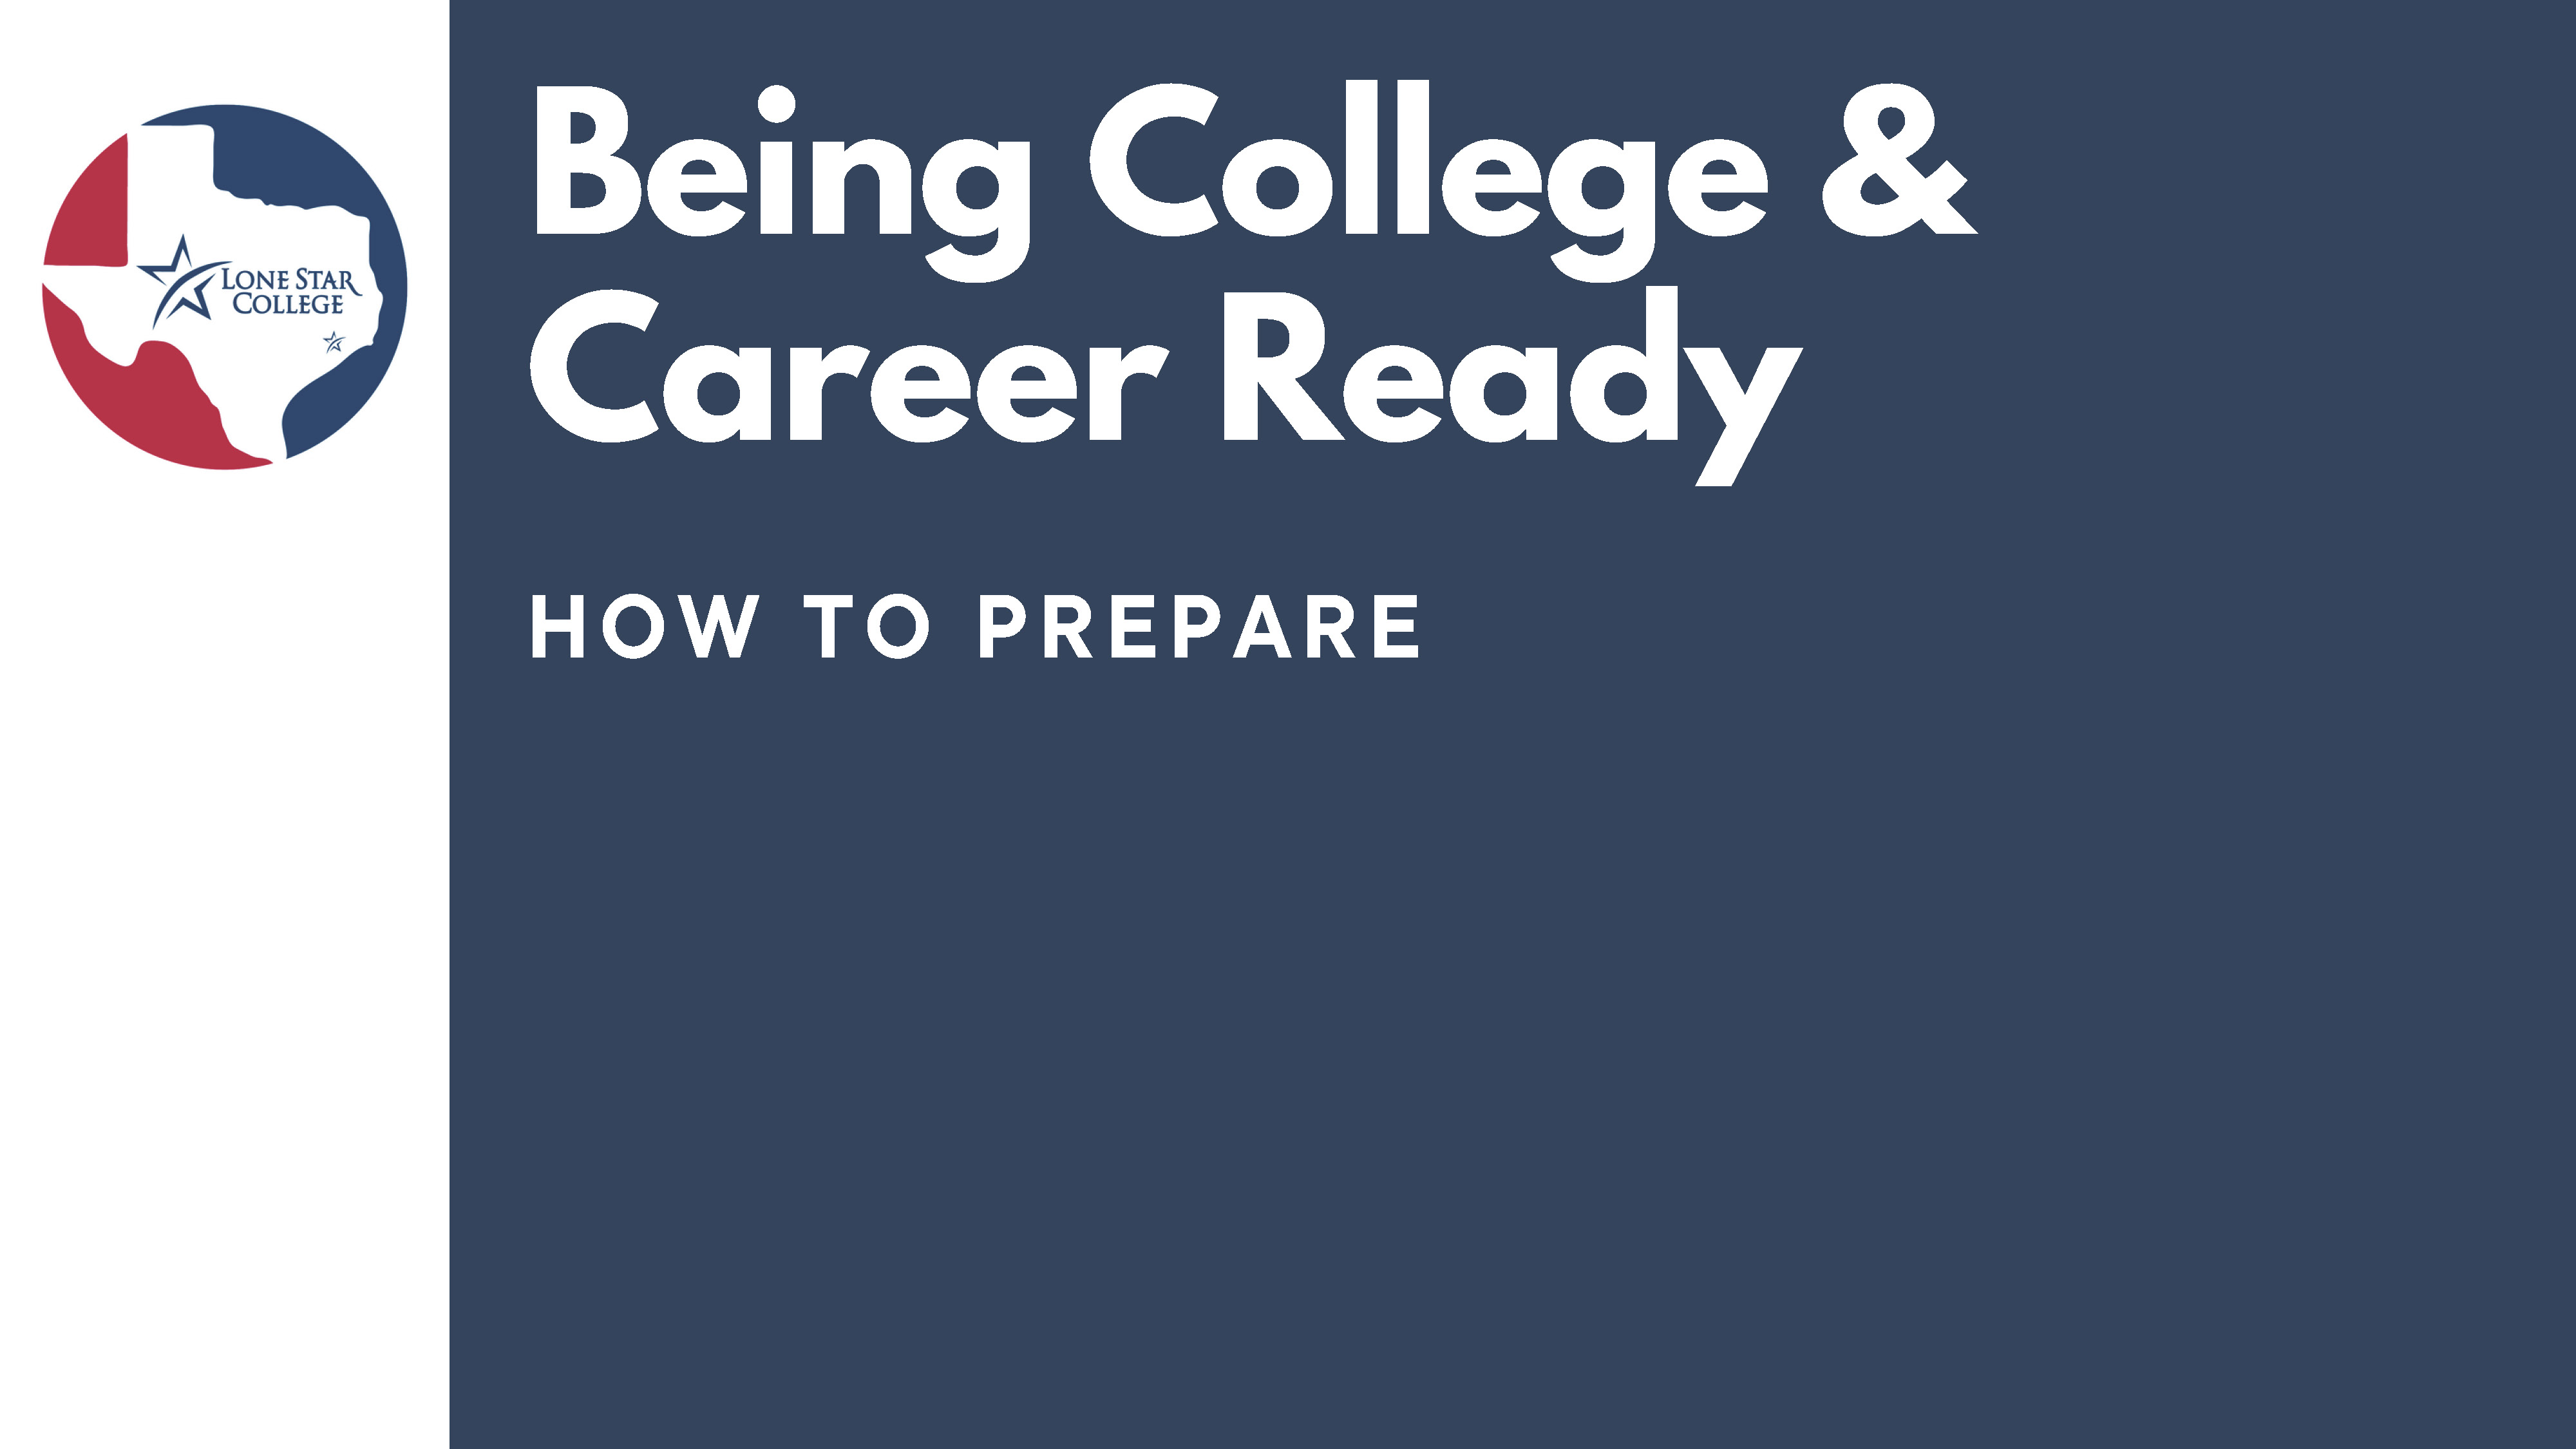 Being College & Career Ready: How to Prepare